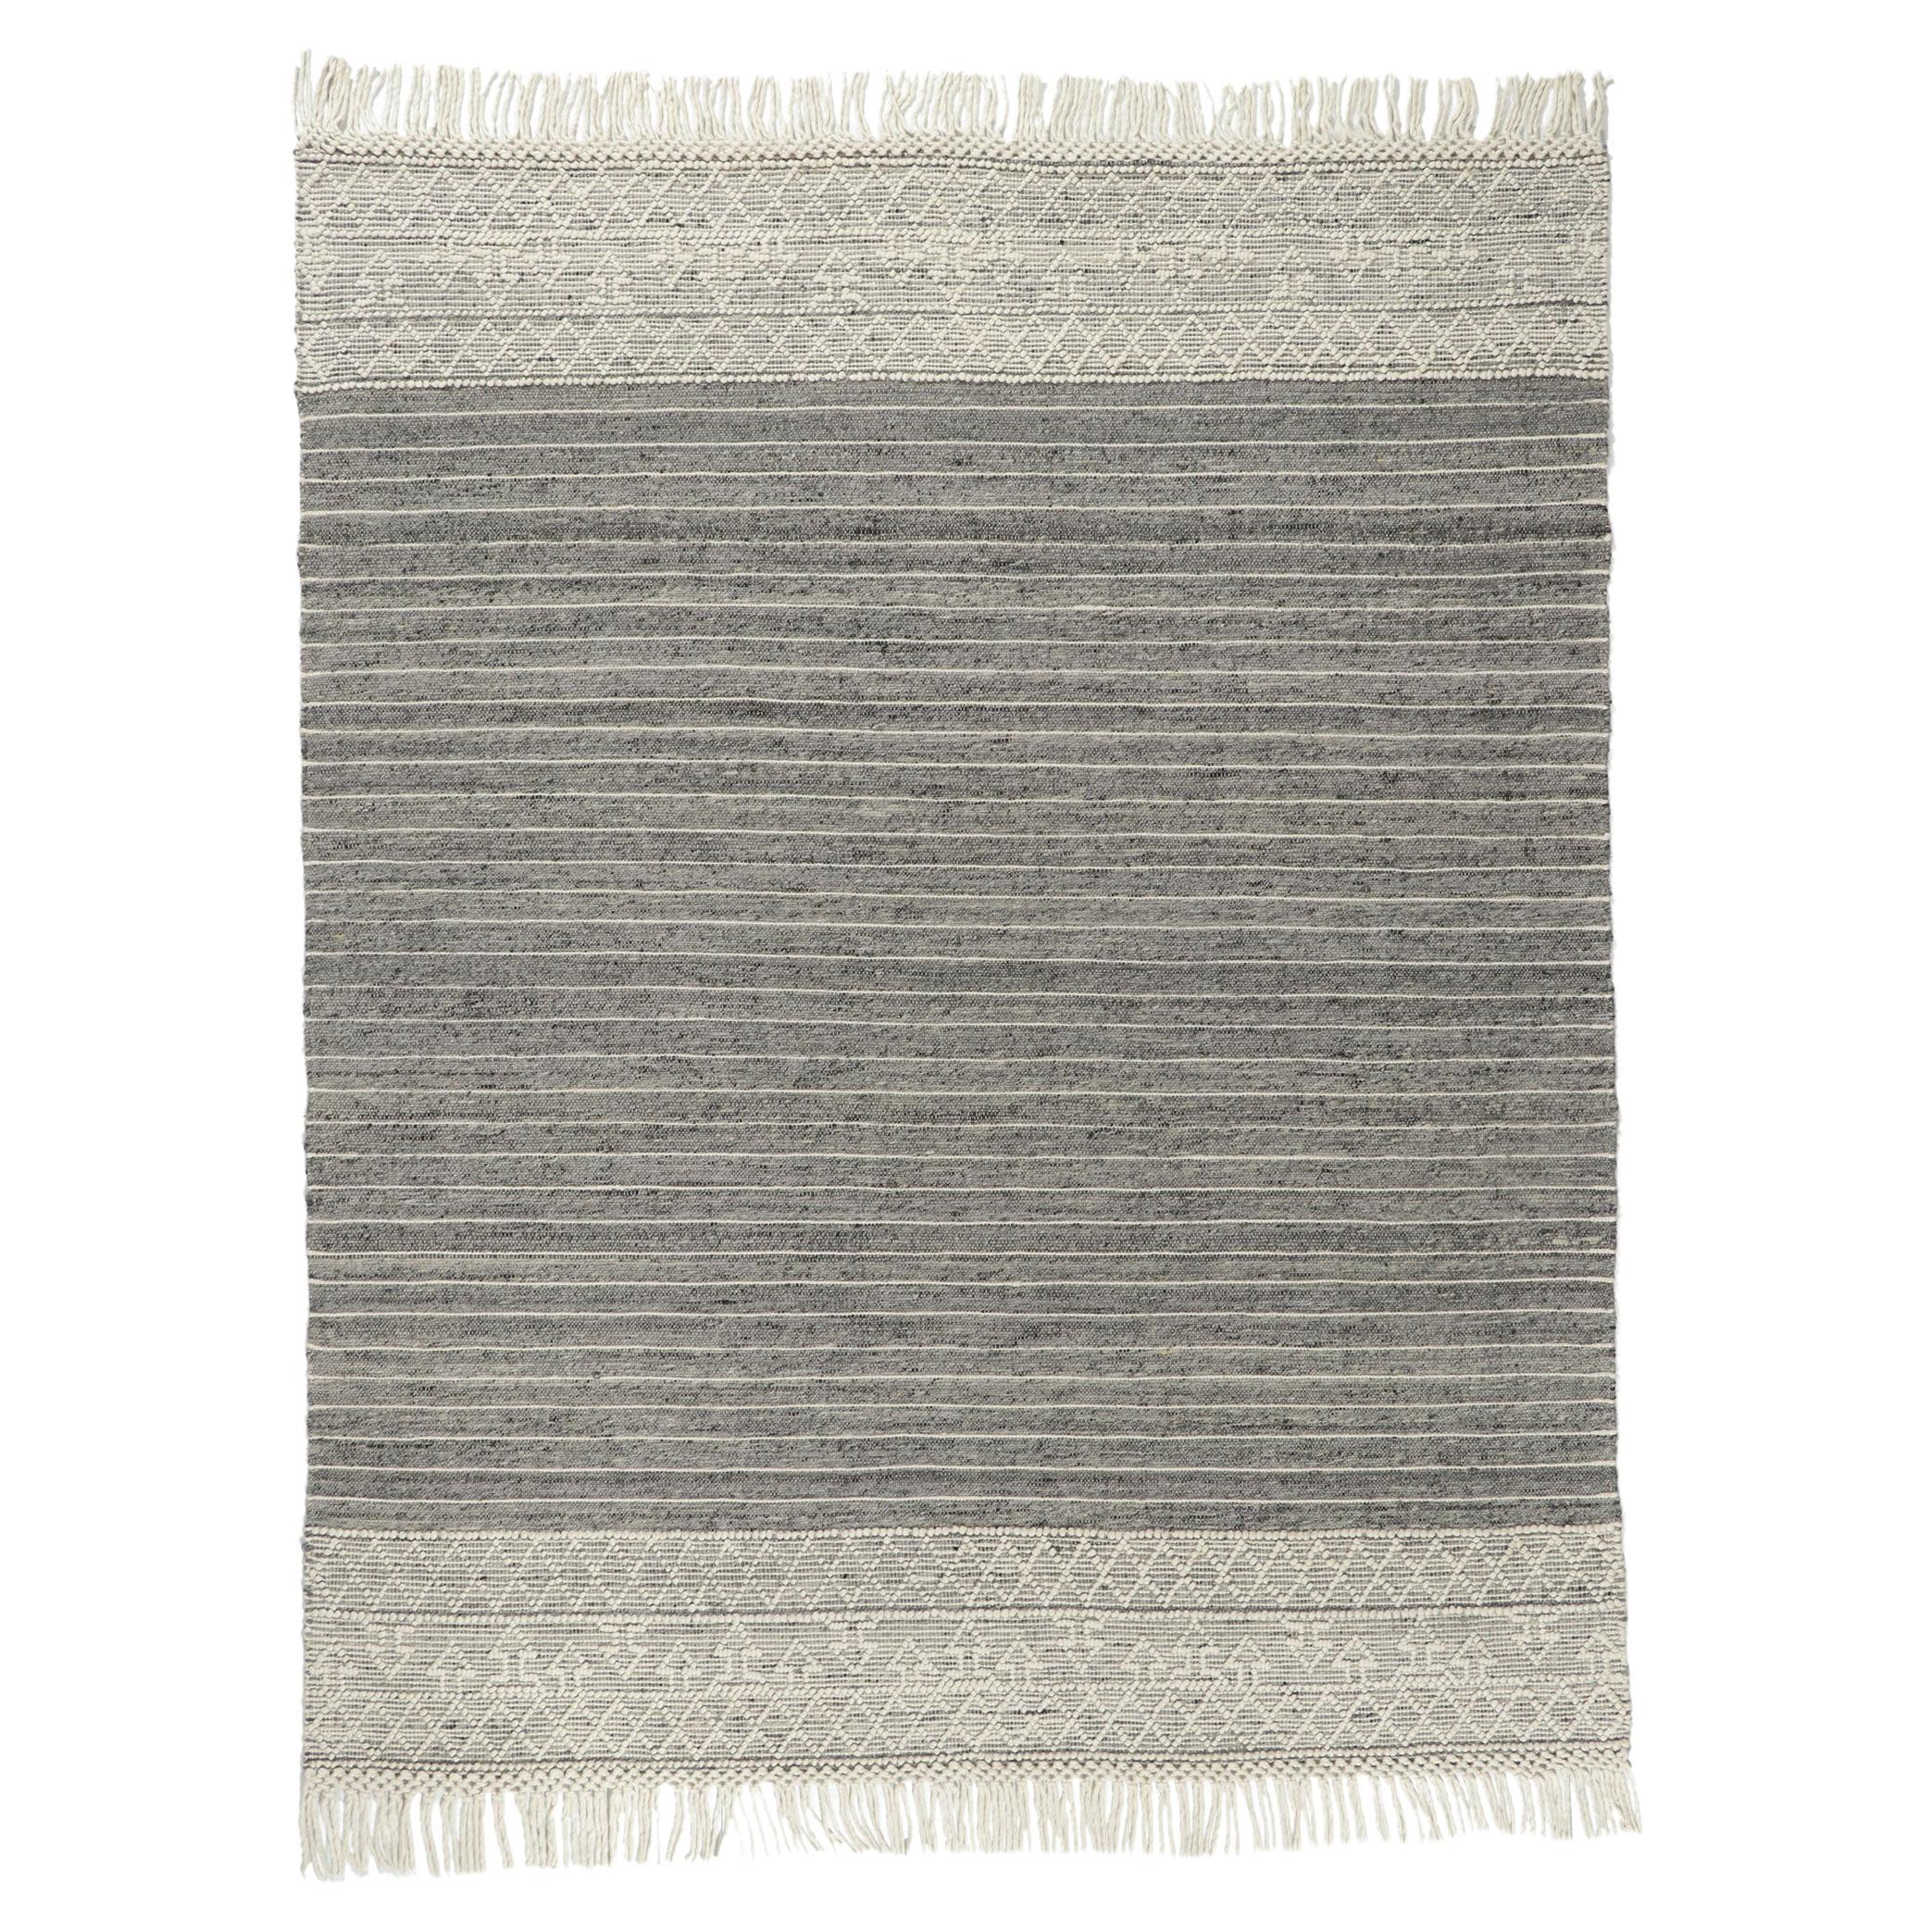 New Handwoven Textured Jute Rug For Sale